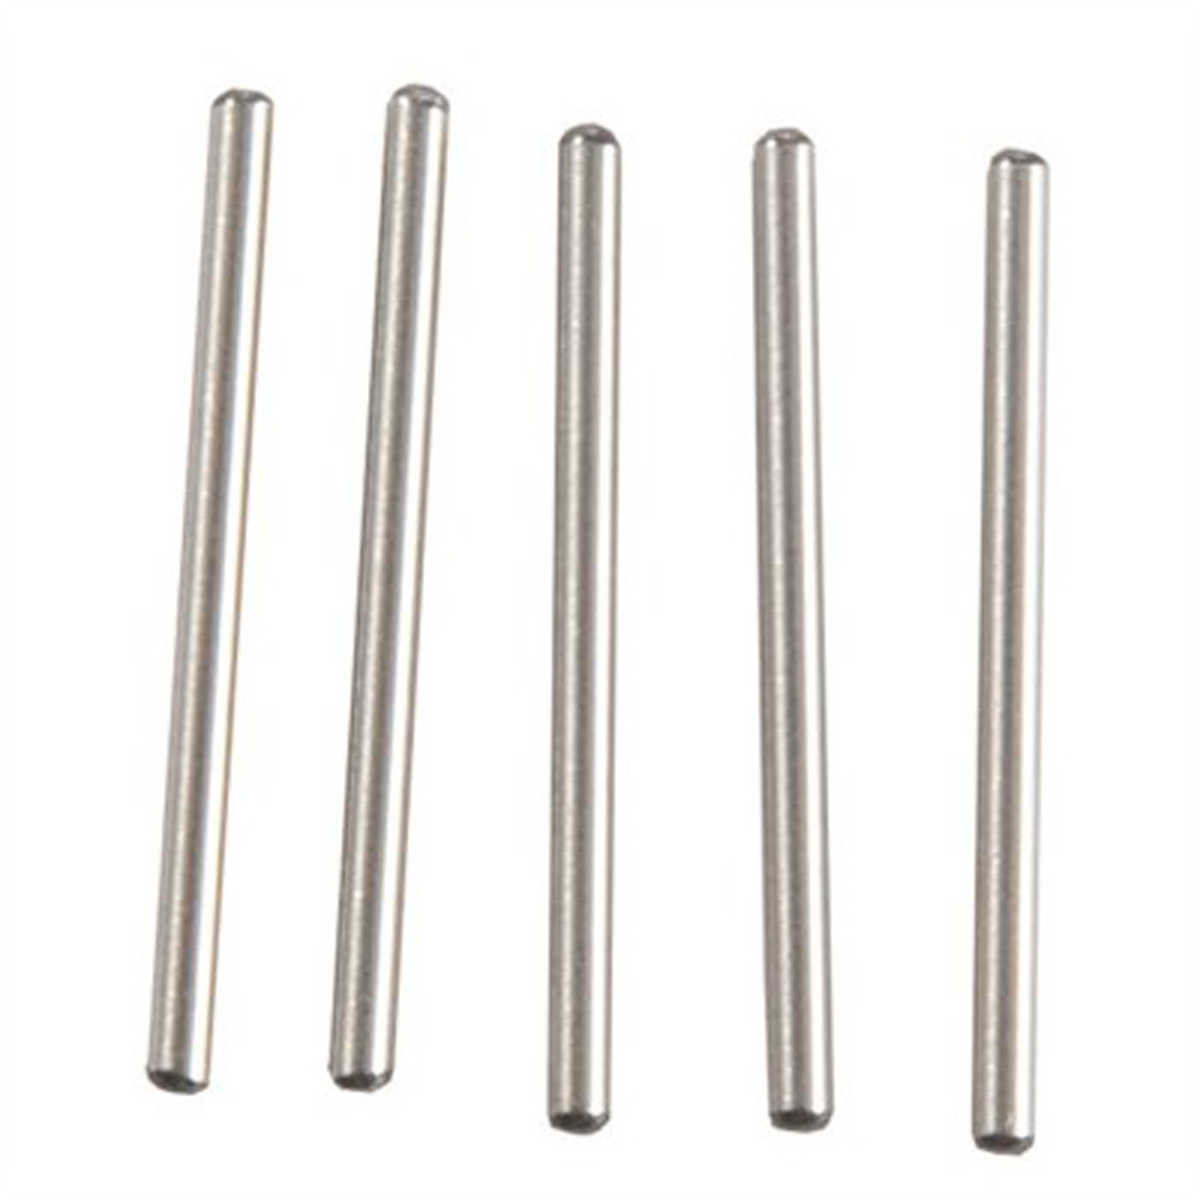 RCBS Decapping PINS- Small 5Pk